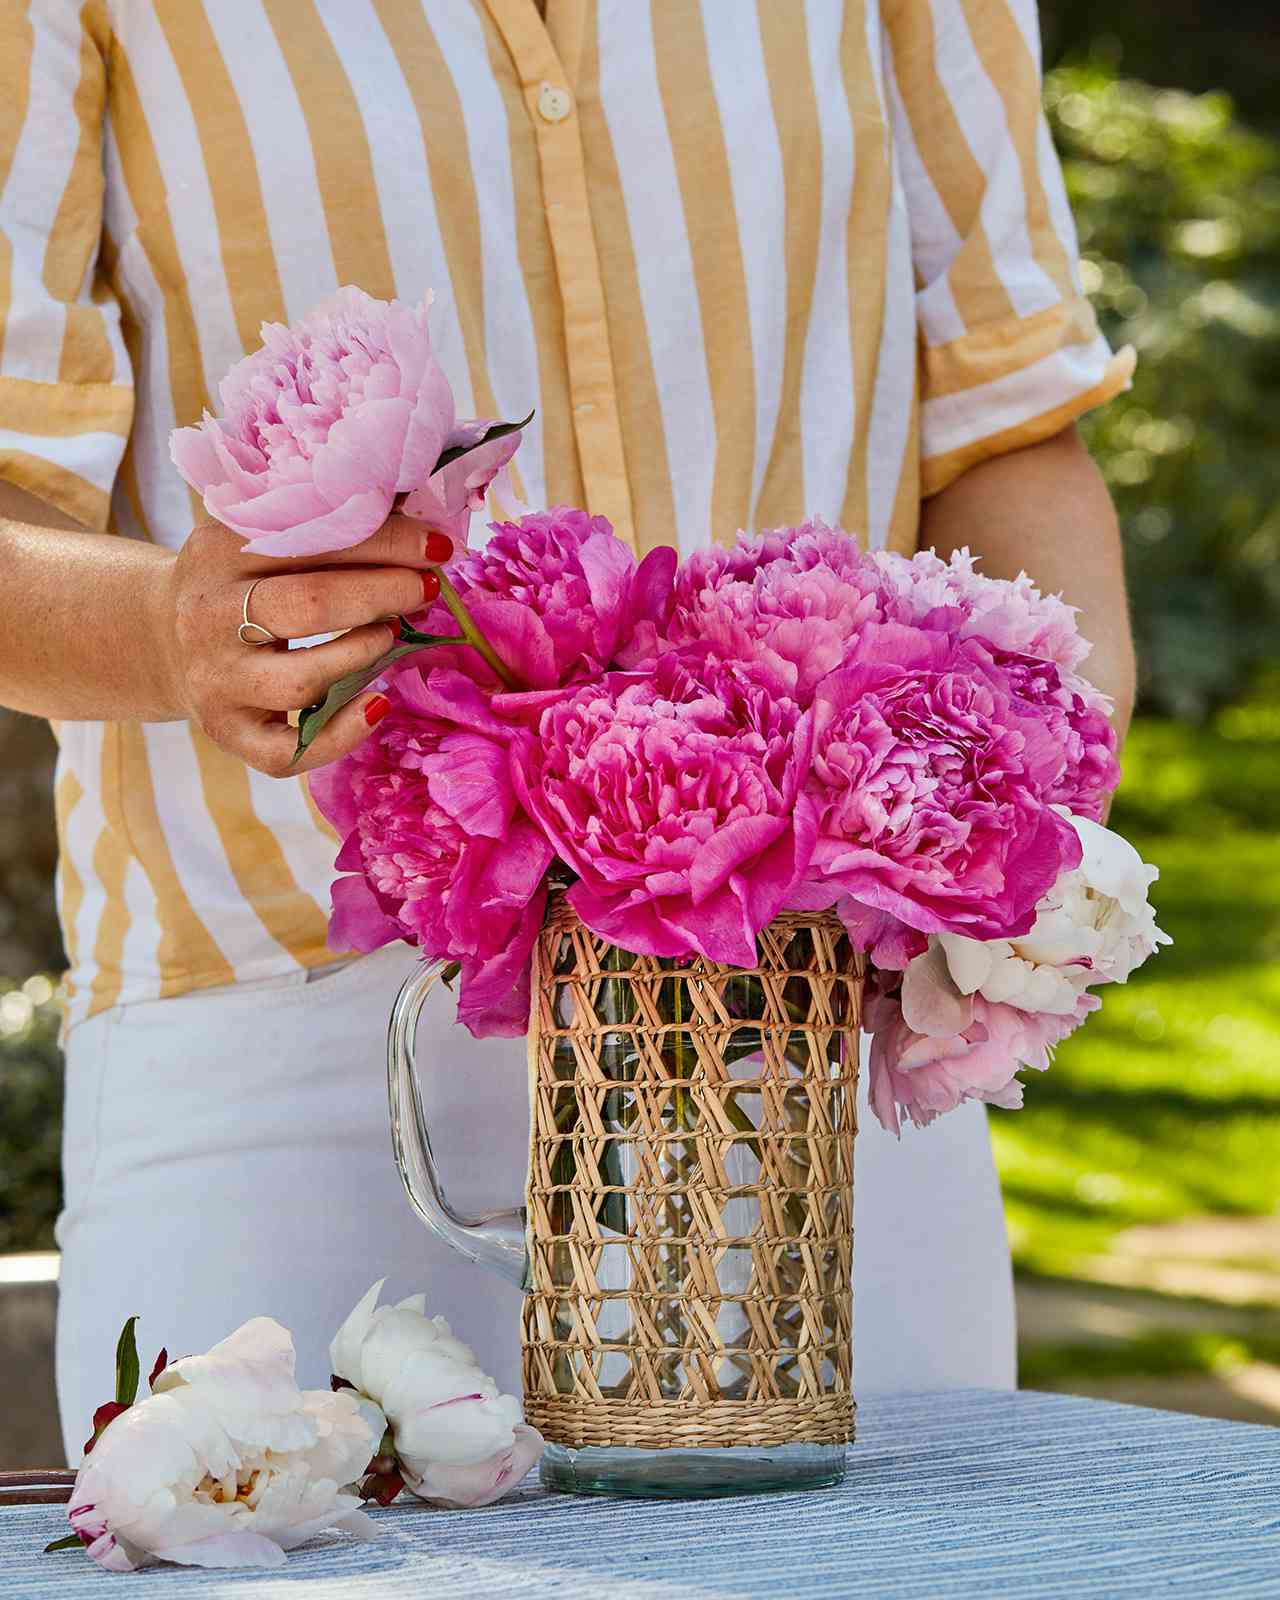 arranging peonies in glass pitcher outdoors